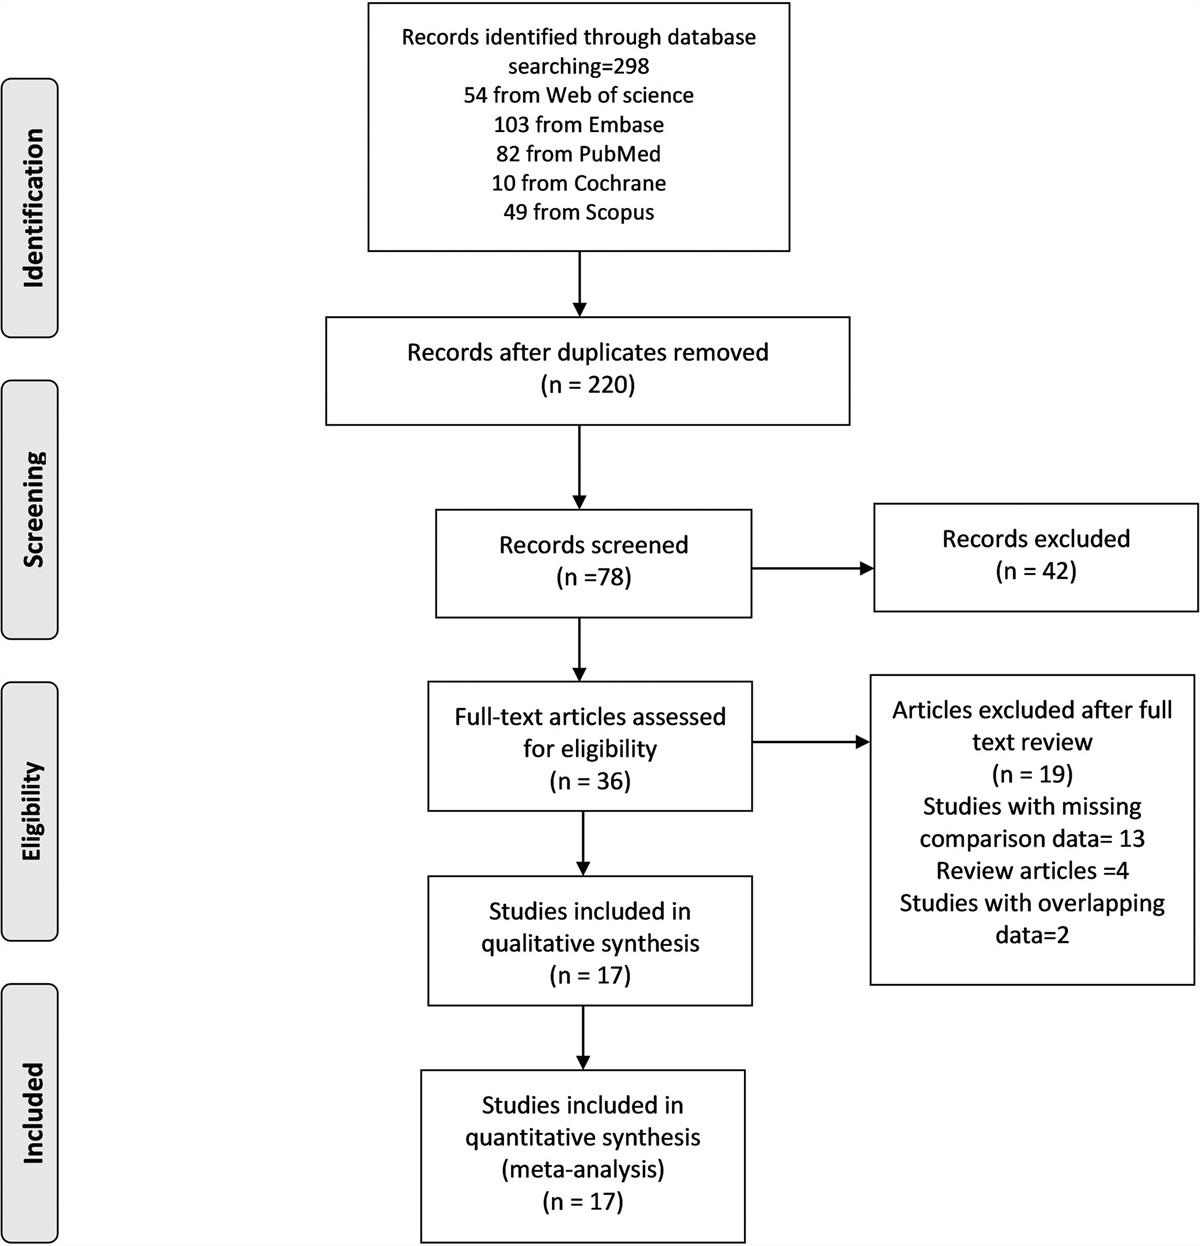 Effect of radiofrequency ablation in addition to biliary stent on overall survival and stent patency in malignant biliary obstruction: an updated systematic review and meta-analysis